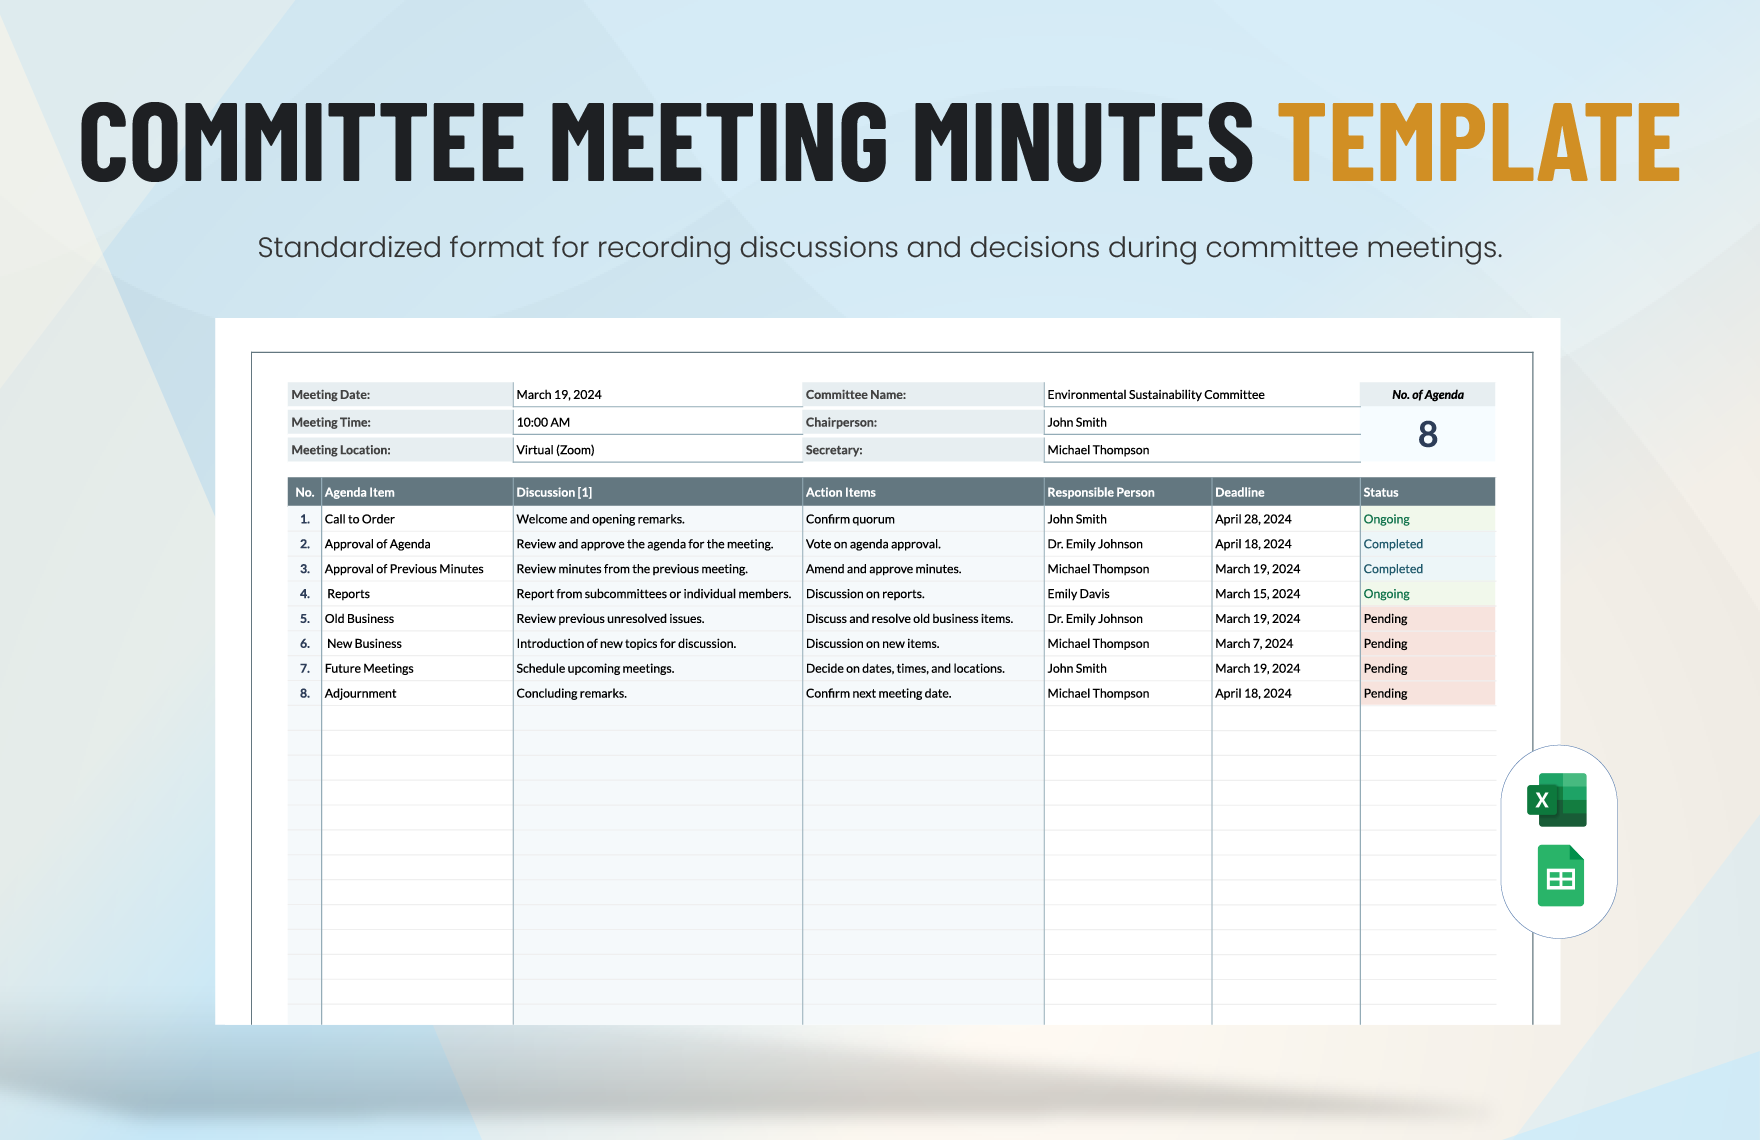 Committee Meeting Minutes Template in Excel, Google Sheets